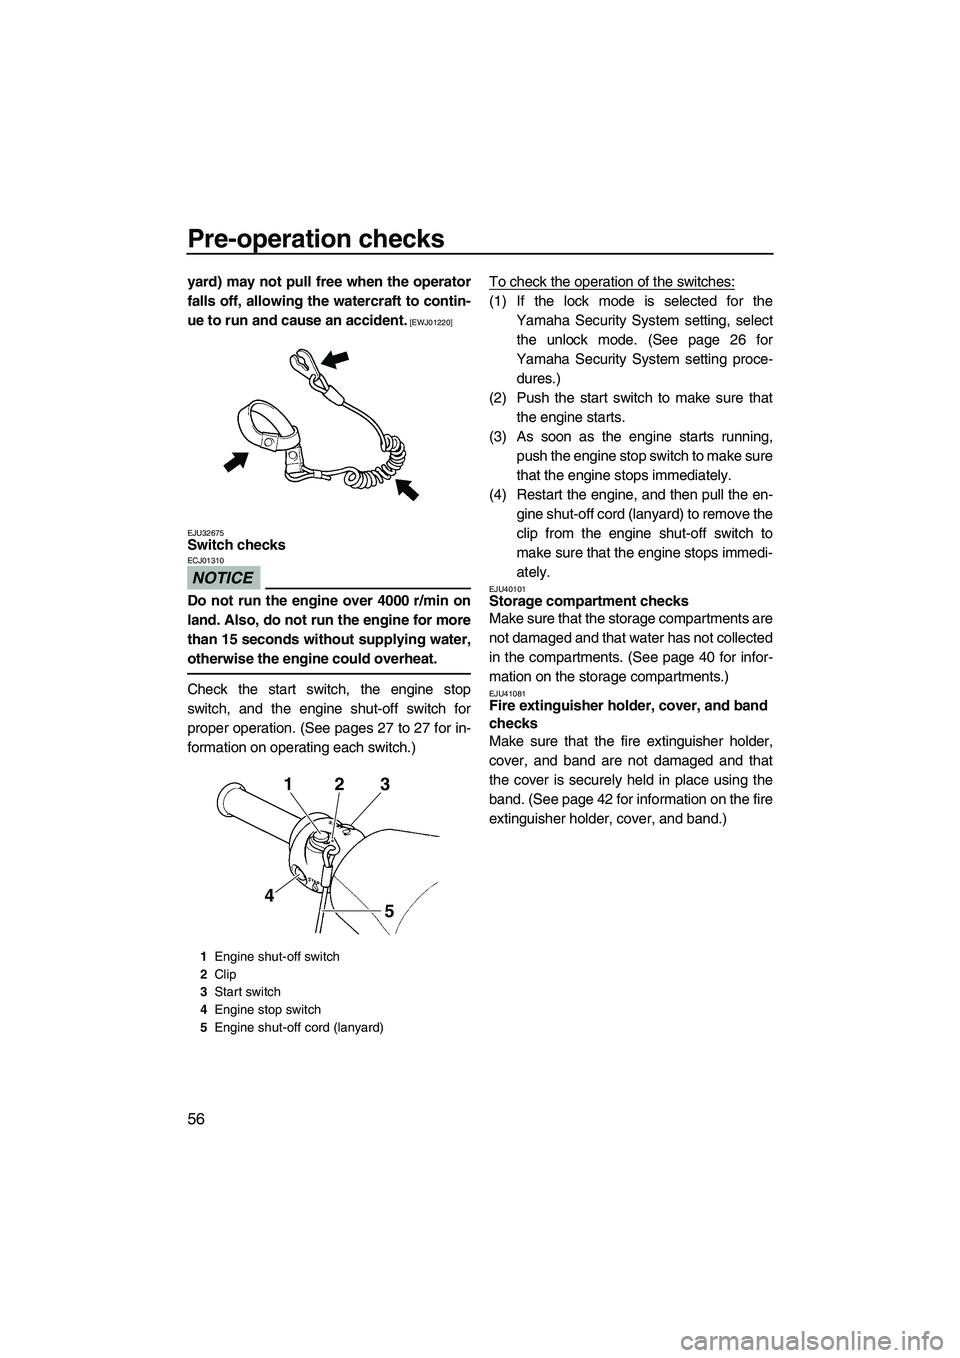 YAMAHA VXS 2012  Owners Manual Pre-operation checks
56
yard) may not pull free when the operator
falls off, allowing the watercraft to contin-
ue to run and cause an accident.
 [EWJ01220]
EJU32675
Switch checks 
NOTICE
ECJ01310
Do 